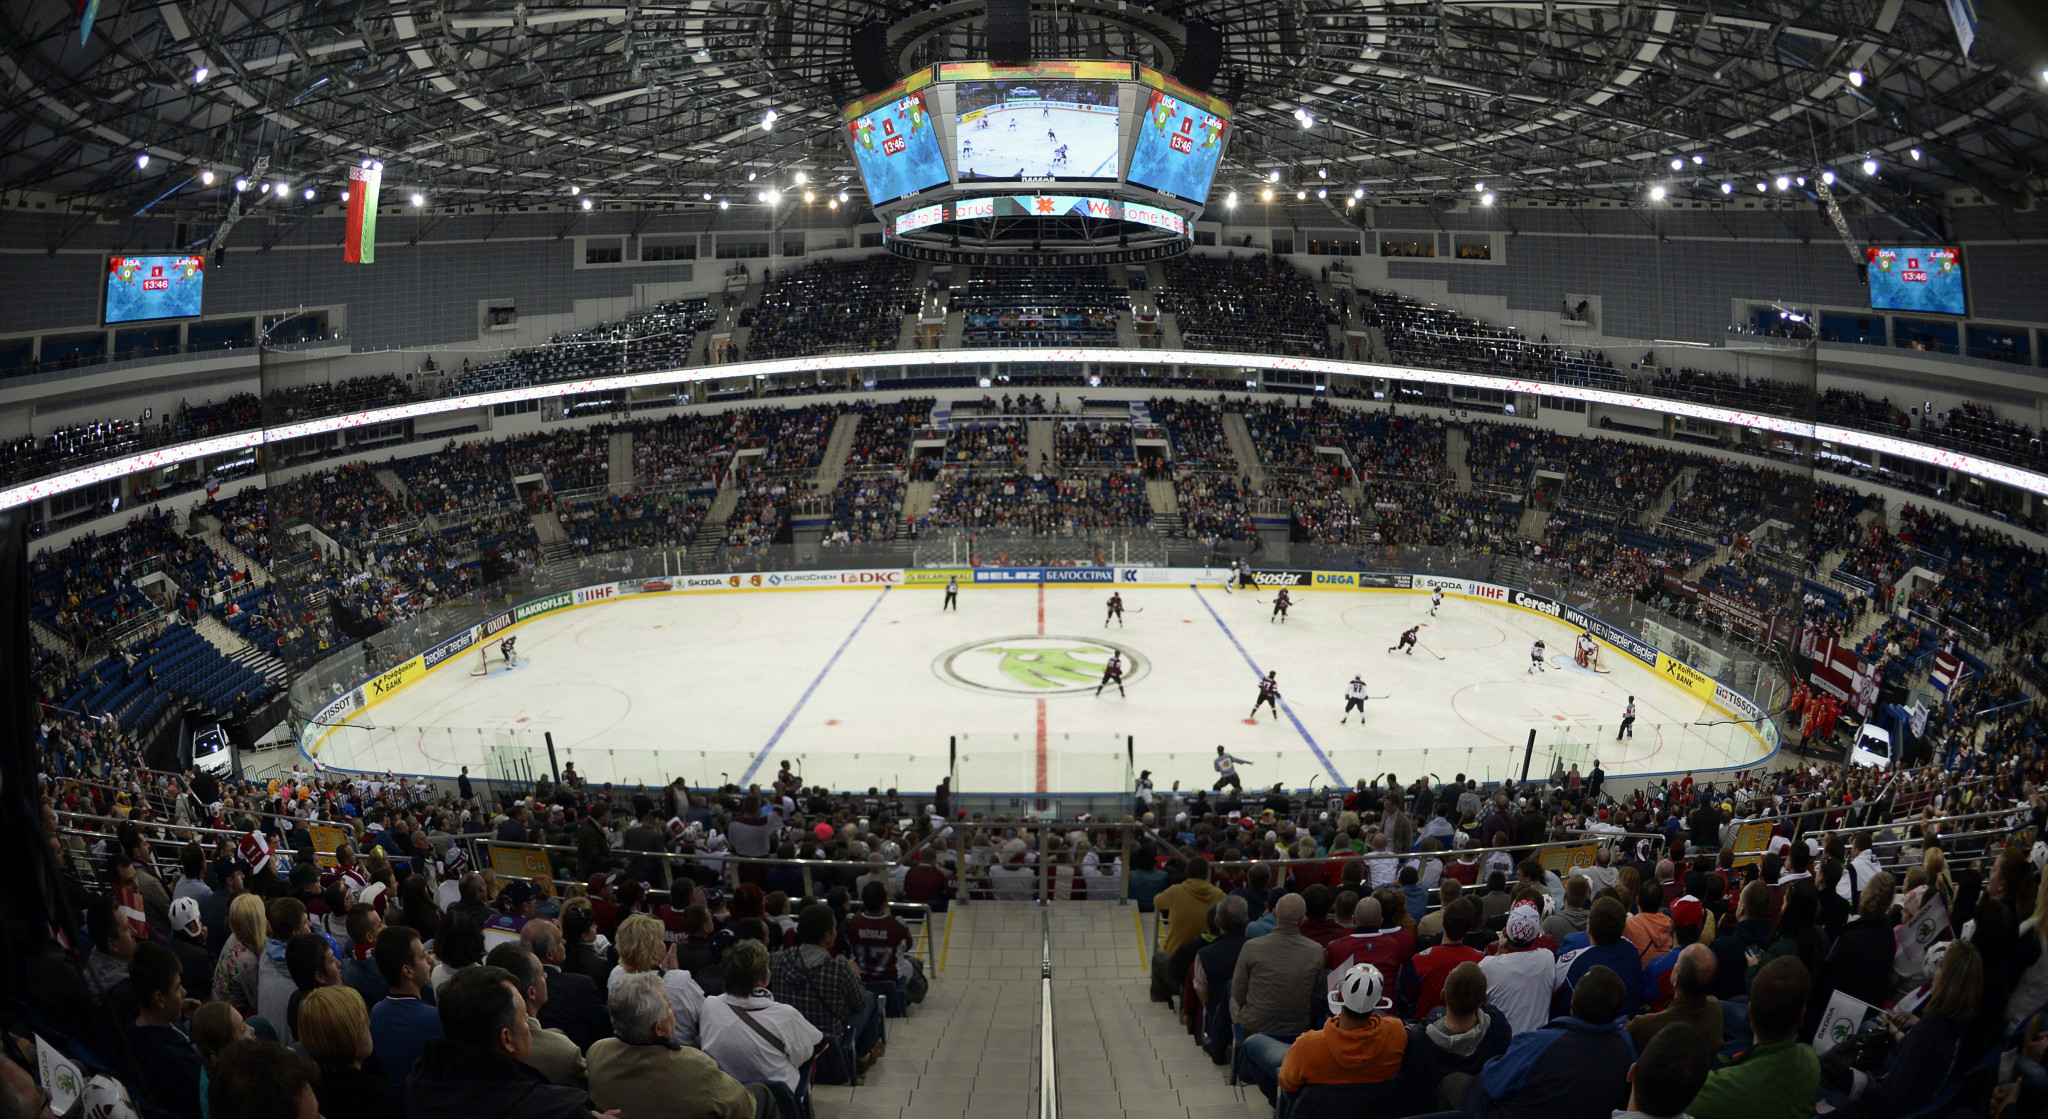 The Arena Minsk will host the 2021 World Championship final ©Getty Images